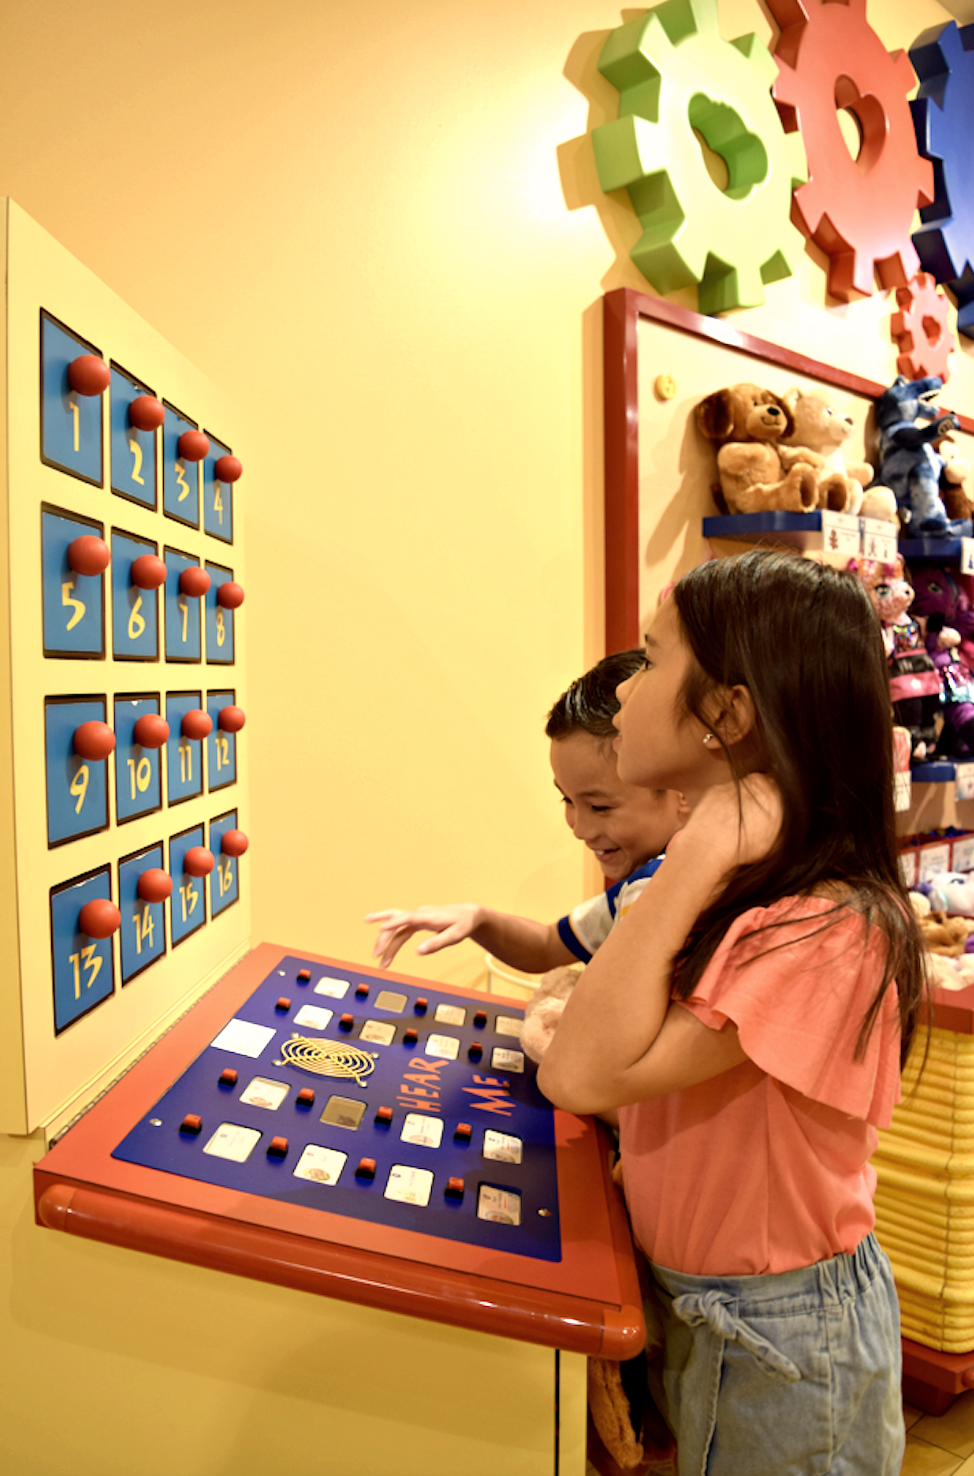 Celebrate National Teddy Bear Day with Build-A-Bear Workshop!